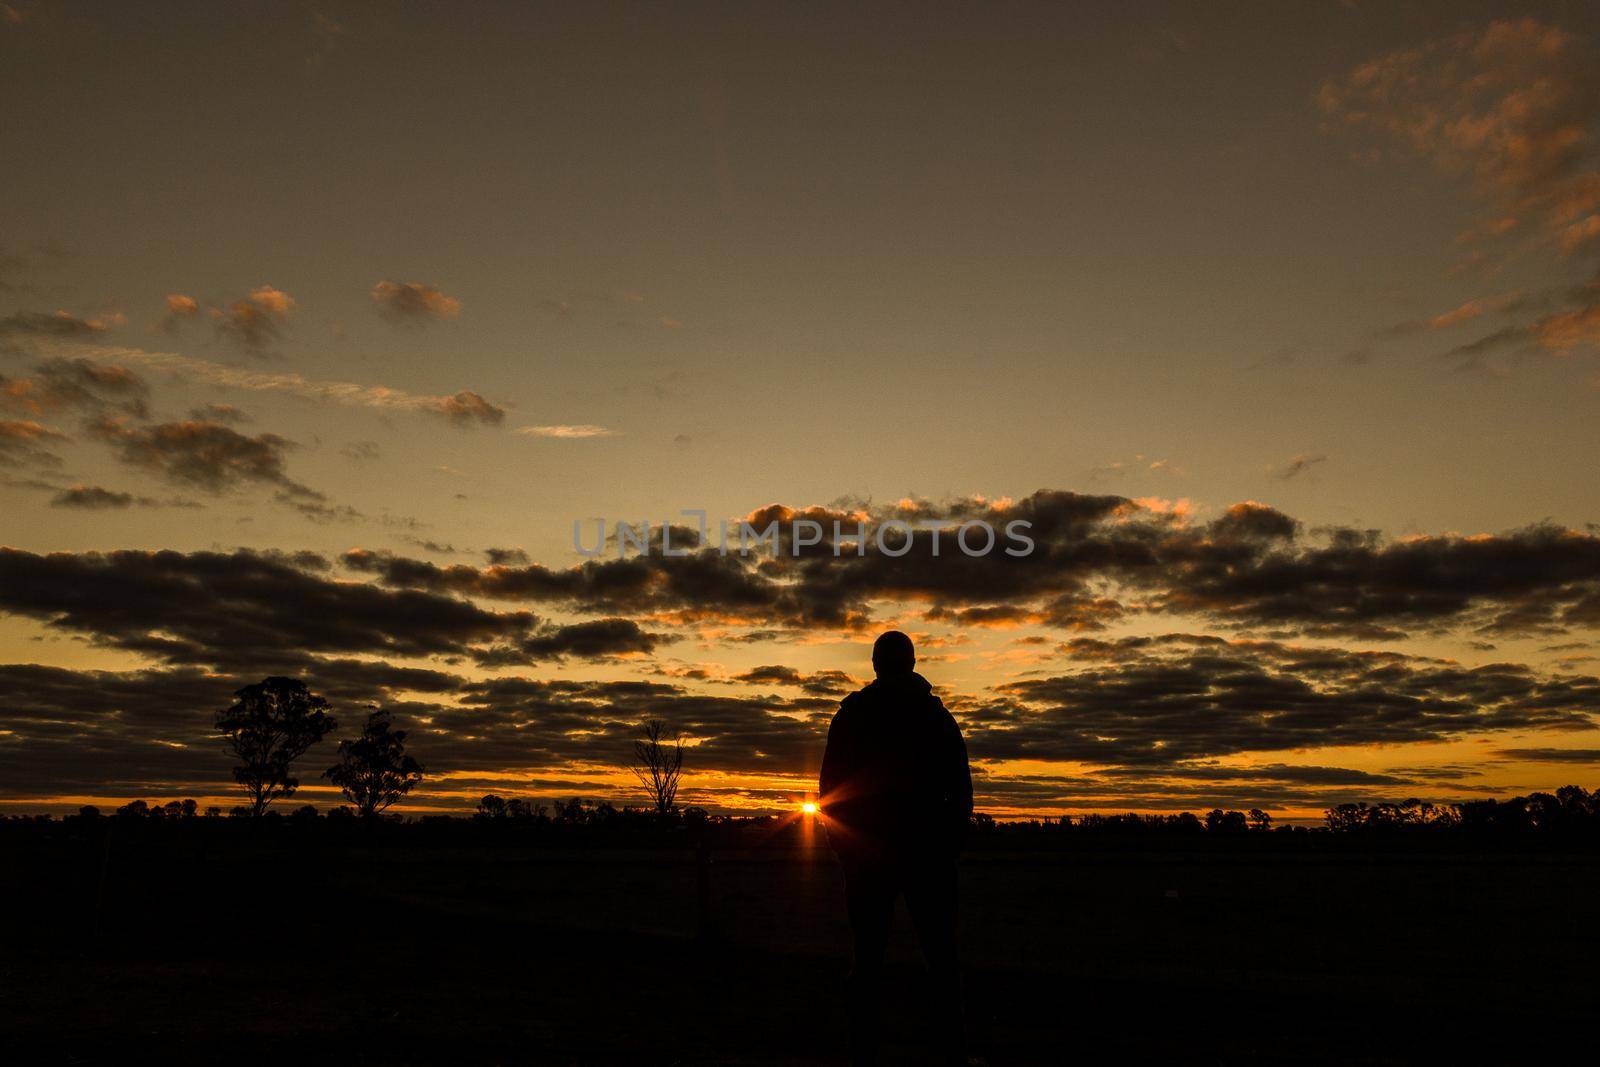 once in a life time sunset in Australia with sillhouettes of trees, Cobram, Victoria